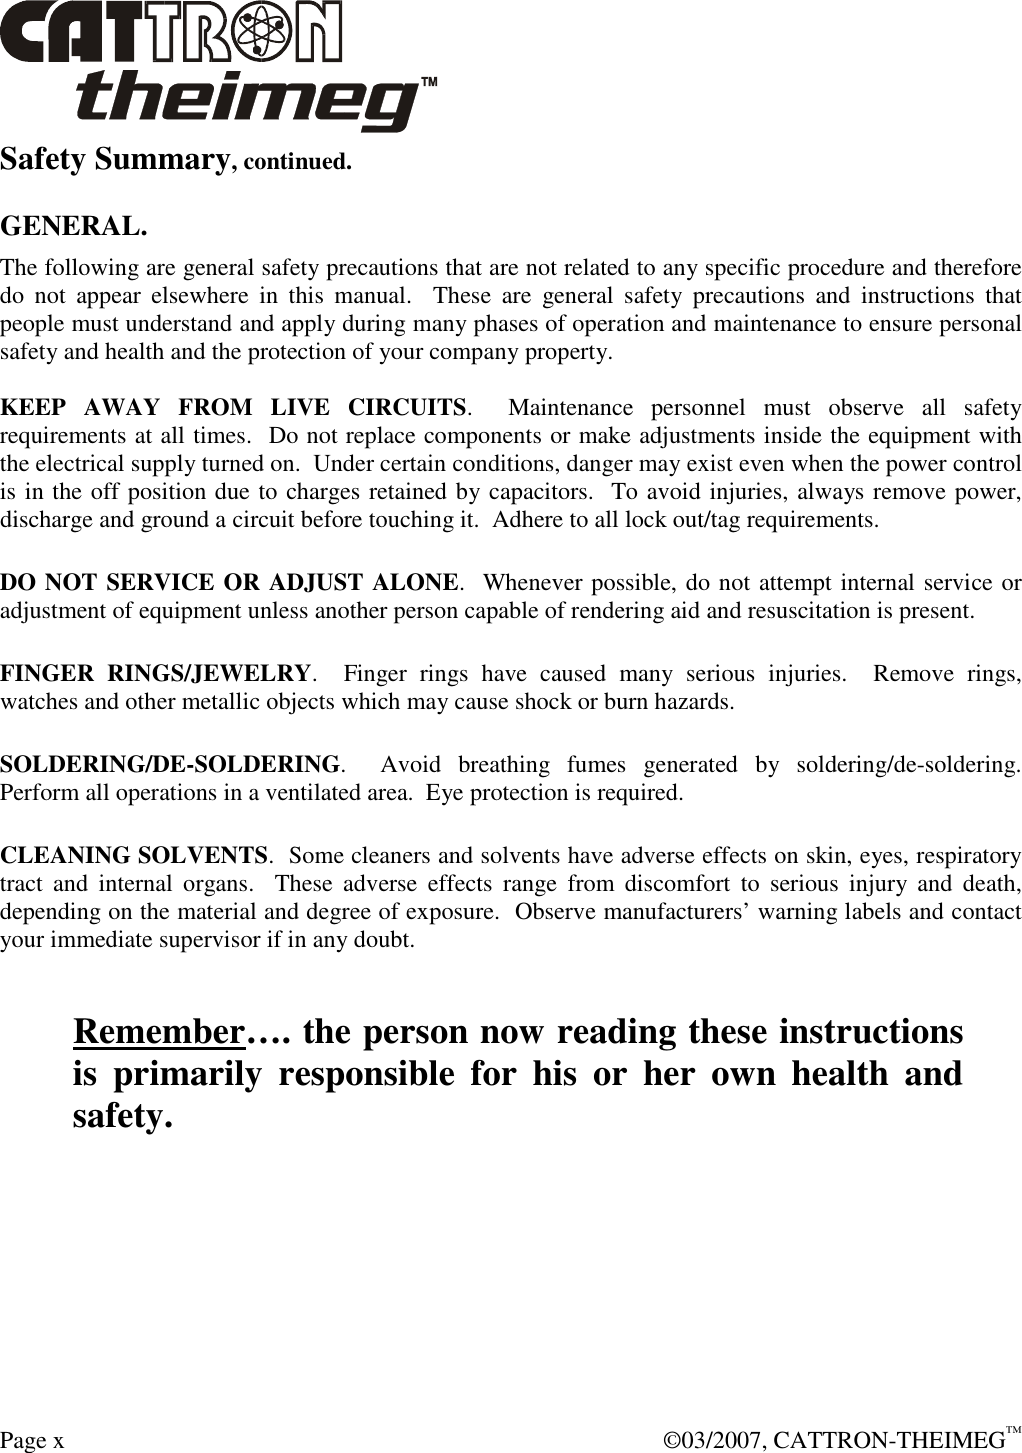  Page x    ©03/2007, CATTRON-THEIMEG™ Safety Summary, continued.  GENERAL. The following are general safety precautions that are not related to any specific procedure and therefore do  not  appear  elsewhere  in  this  manual.    These  are  general  safety  precautions  and  instructions  that people must understand and apply during many phases of operation and maintenance to ensure personal safety and health and the protection of your company property.  KEEP  AWAY  FROM  LIVE  CIRCUITS.    Maintenance  personnel  must  observe  all  safety requirements at all times.  Do not replace components or make adjustments inside the equipment with the electrical supply turned on.  Under certain conditions, danger may exist even when the power control is in the off position due to charges retained by capacitors.  To avoid injuries, always remove power, discharge and ground a circuit before touching it.  Adhere to all lock out/tag requirements.   DO NOT SERVICE OR ADJUST ALONE.  Whenever possible, do not attempt internal service or adjustment of equipment unless another person capable of rendering aid and resuscitation is present.   FINGER  RINGS/JEWELRY.    Finger  rings  have  caused  many  serious  injuries.    Remove  rings, watches and other metallic objects which may cause shock or burn hazards.     SOLDERING/DE-SOLDERING.    Avoid  breathing  fumes  generated  by  soldering/de-soldering. Perform all operations in a ventilated area.  Eye protection is required.   CLEANING SOLVENTS.  Some cleaners and solvents have adverse effects on skin, eyes, respiratory tract  and  internal  organs.    These  adverse  effects  range  from  discomfort  to  serious  injury  and  death, depending on the material and degree of exposure.  Observe manufacturers’ warning labels and contact your immediate supervisor if in any doubt.   Remember…. the person now reading these instructions is  primarily  responsible  for  his  or  her  own  health  and safety. 